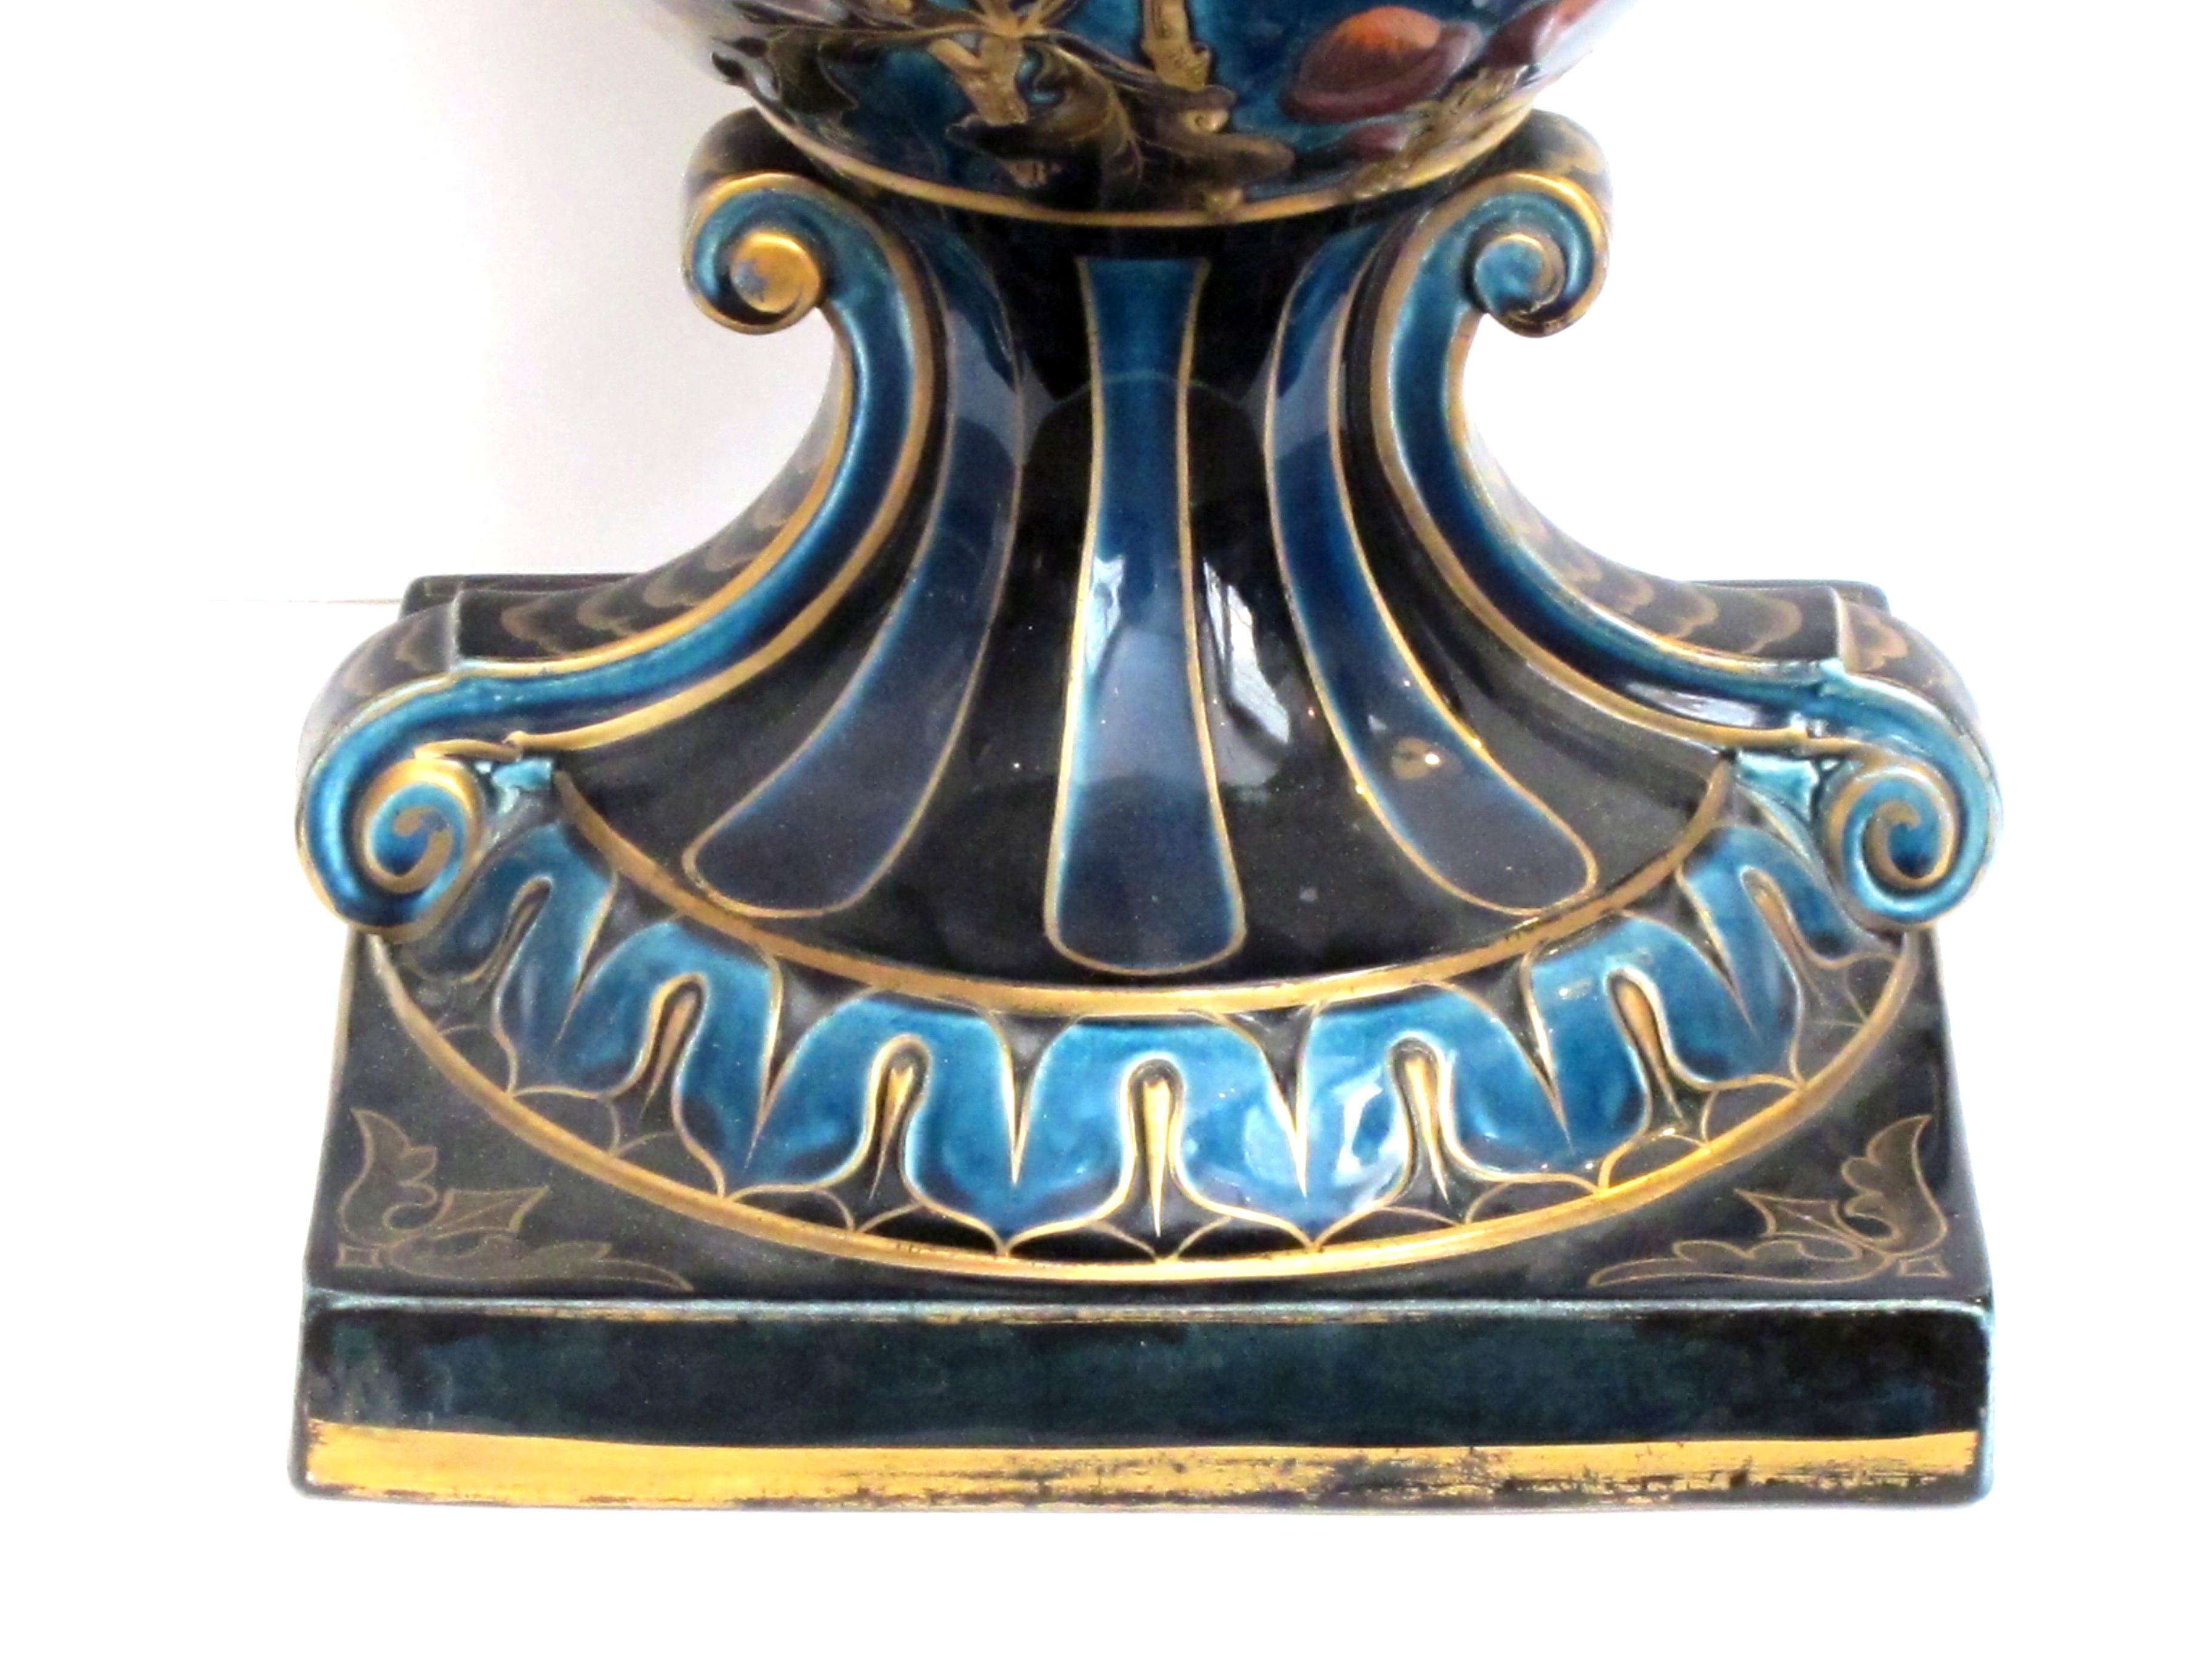 Large and Exquisitely Rendered English Teal-Glazed Ceramic Urn 4